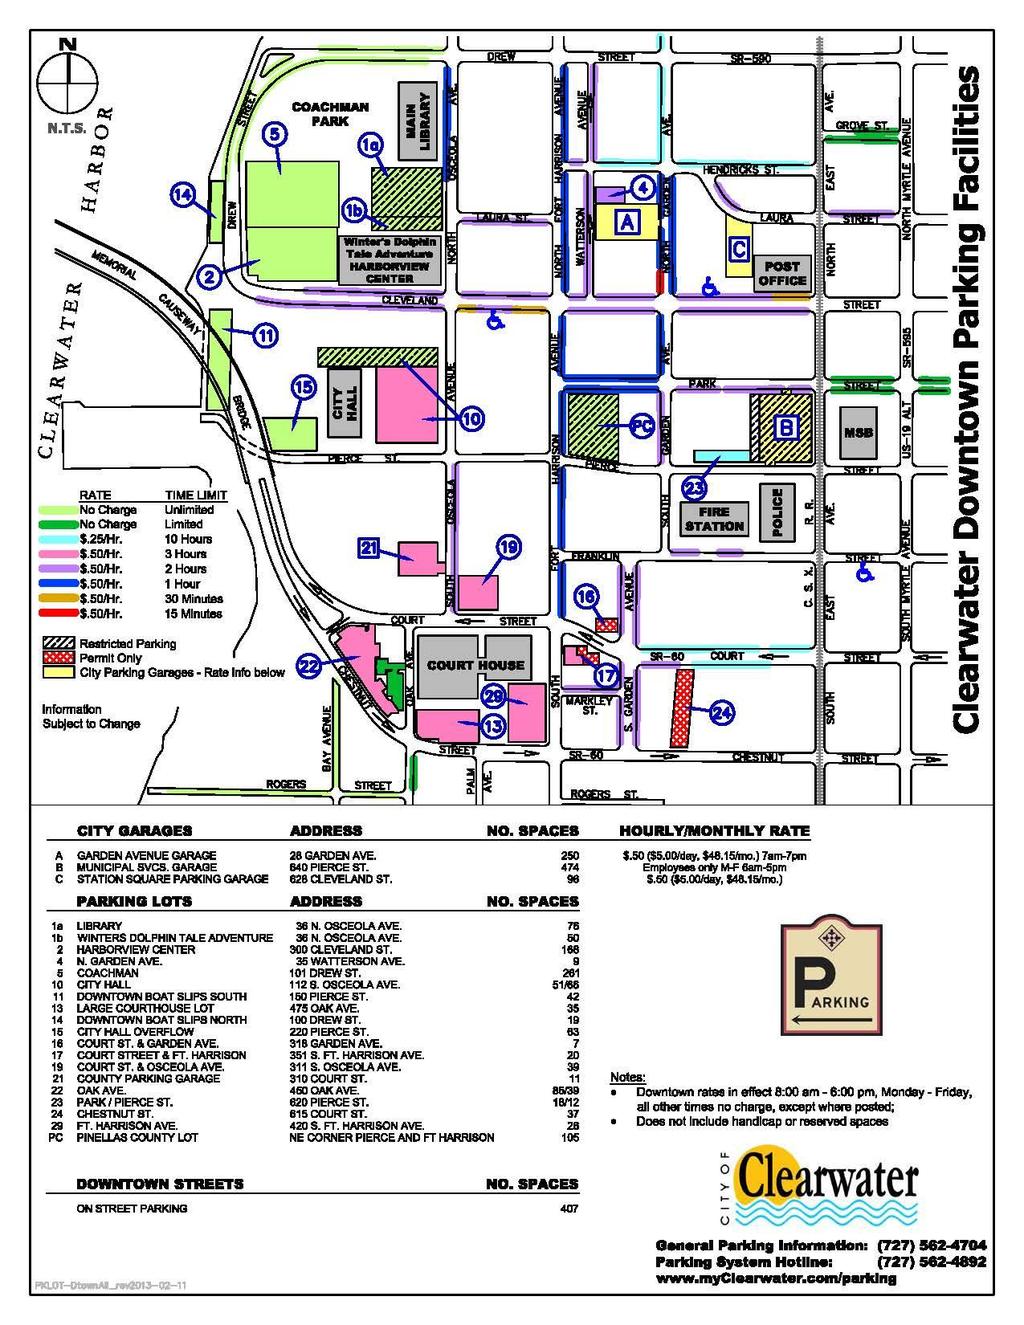 Parking Information Arrive early to secure one of the 425 FREE parking spots at Coachman Park - entrance via Cleveland St. or Osceola Ave.